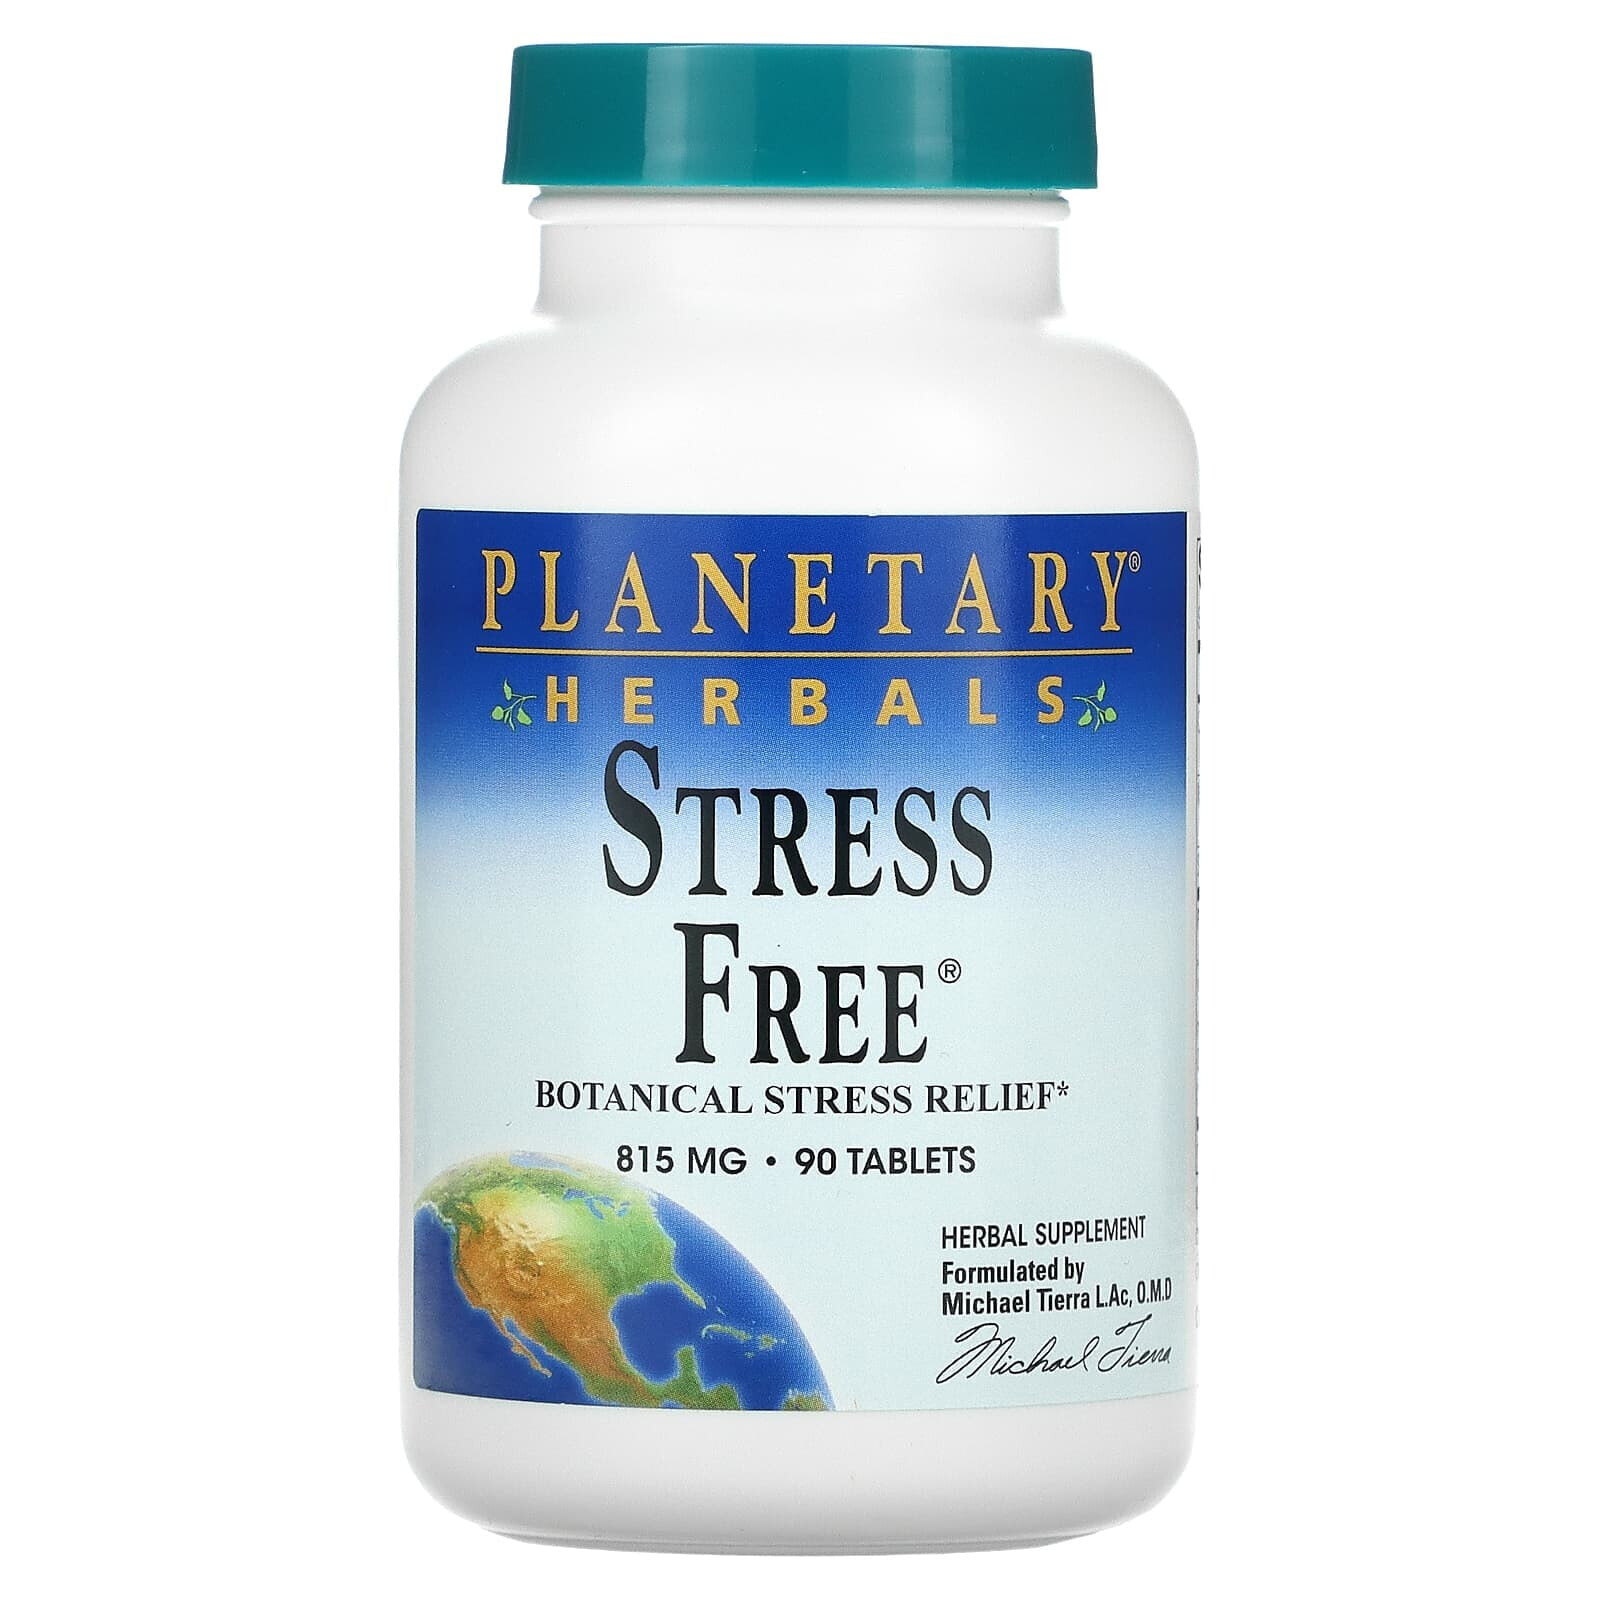 Stress Free, Botanical Stress Relief, 815 mg, 90 Tablets